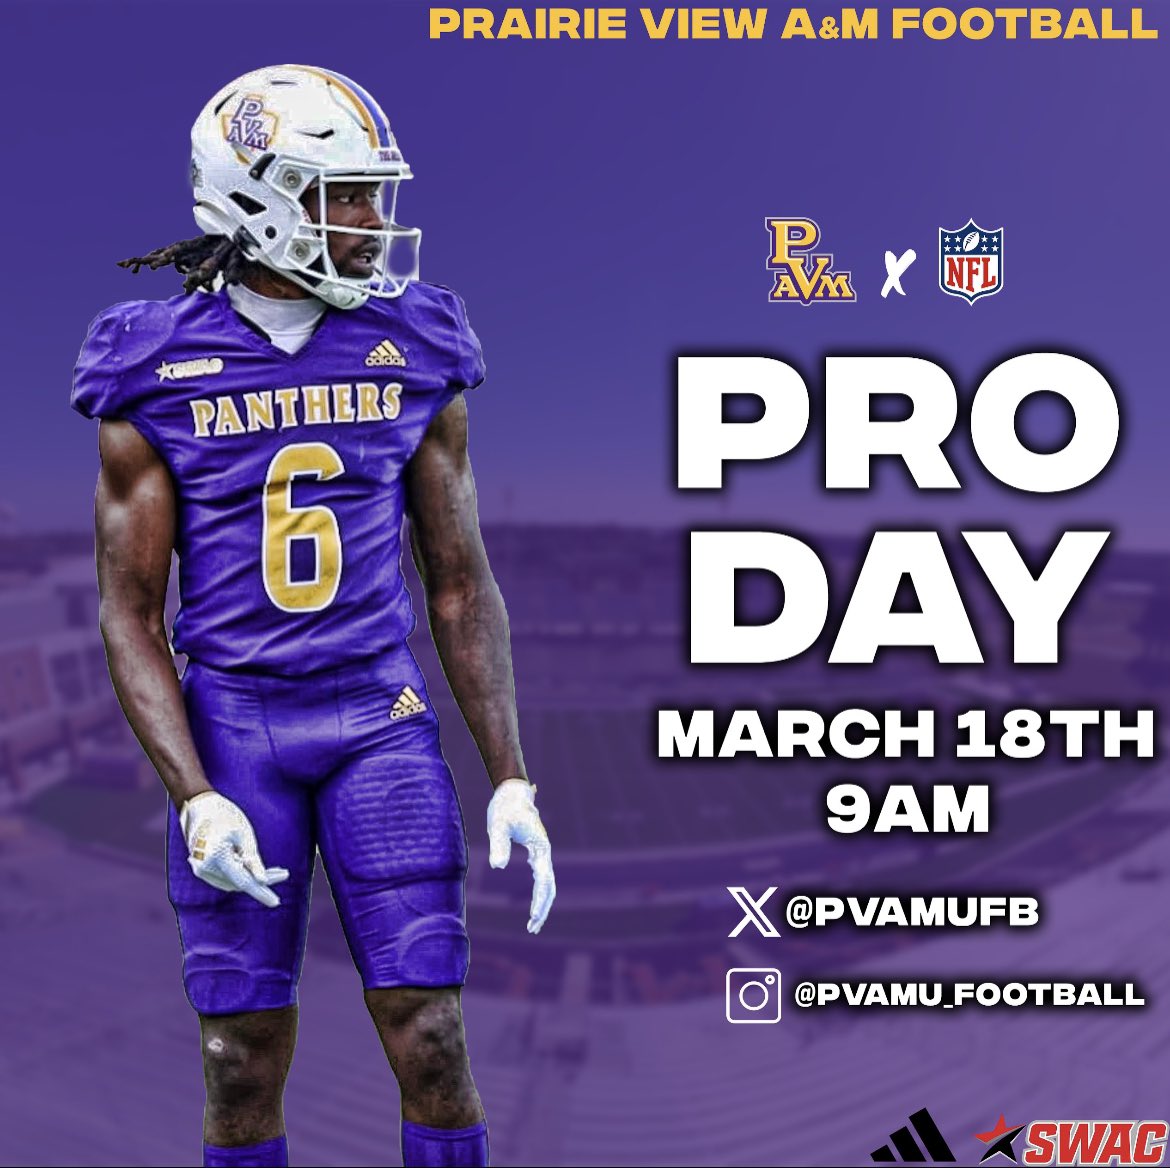 It’s Pro Day at the Hill! Watch our Panthers dominate the field and show off their skills! 🏈💪 They Need all your support Panther Nation ! #Pvamufootball | #PurpleandGold